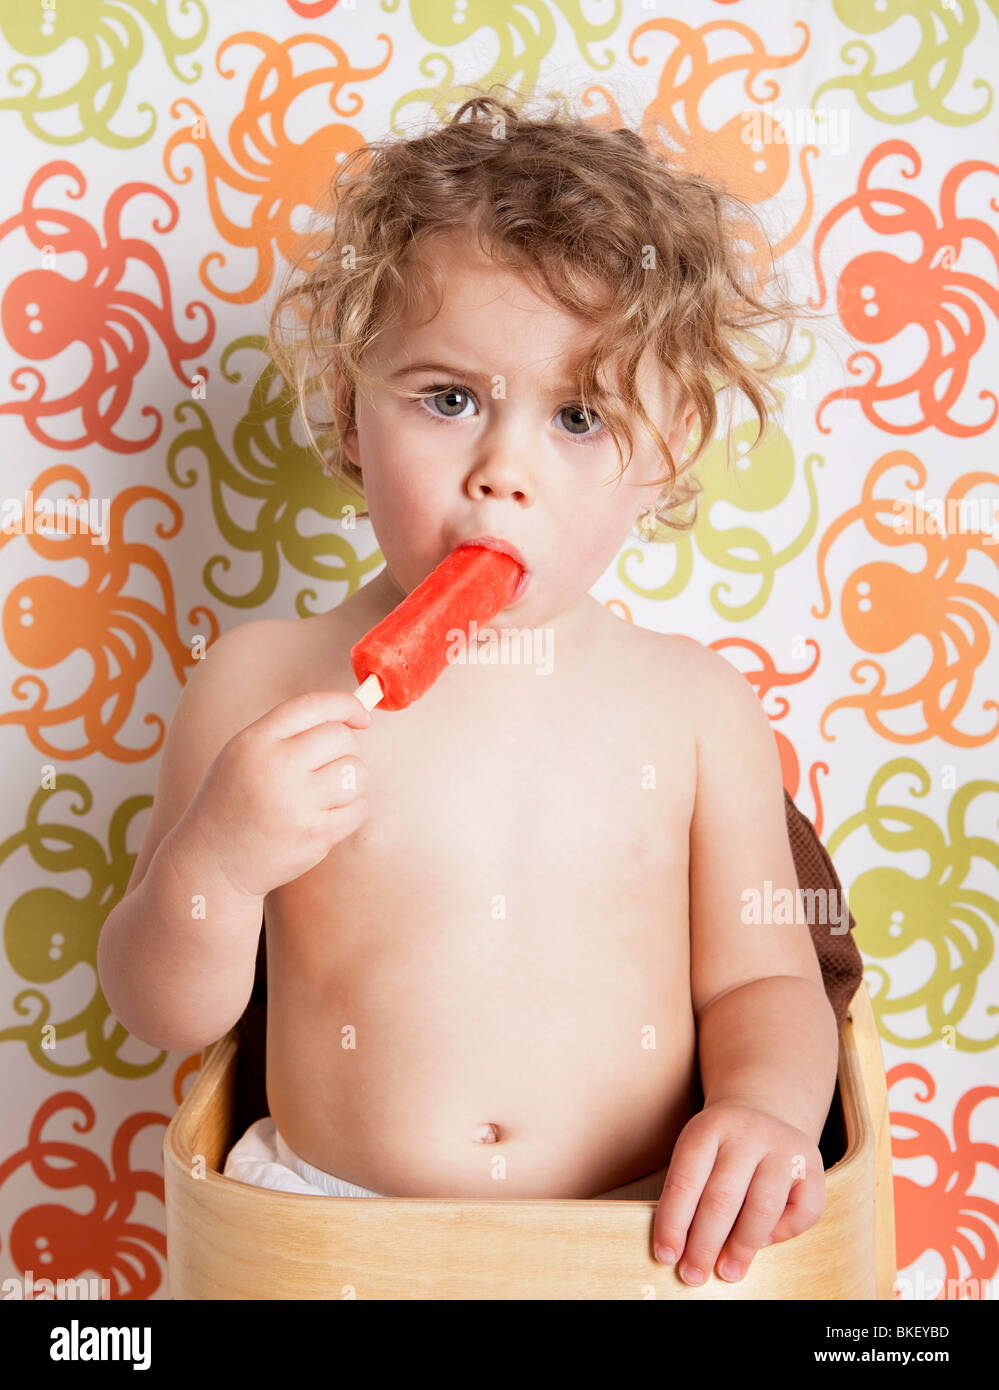 Young child eating a popsicle Stock Photo